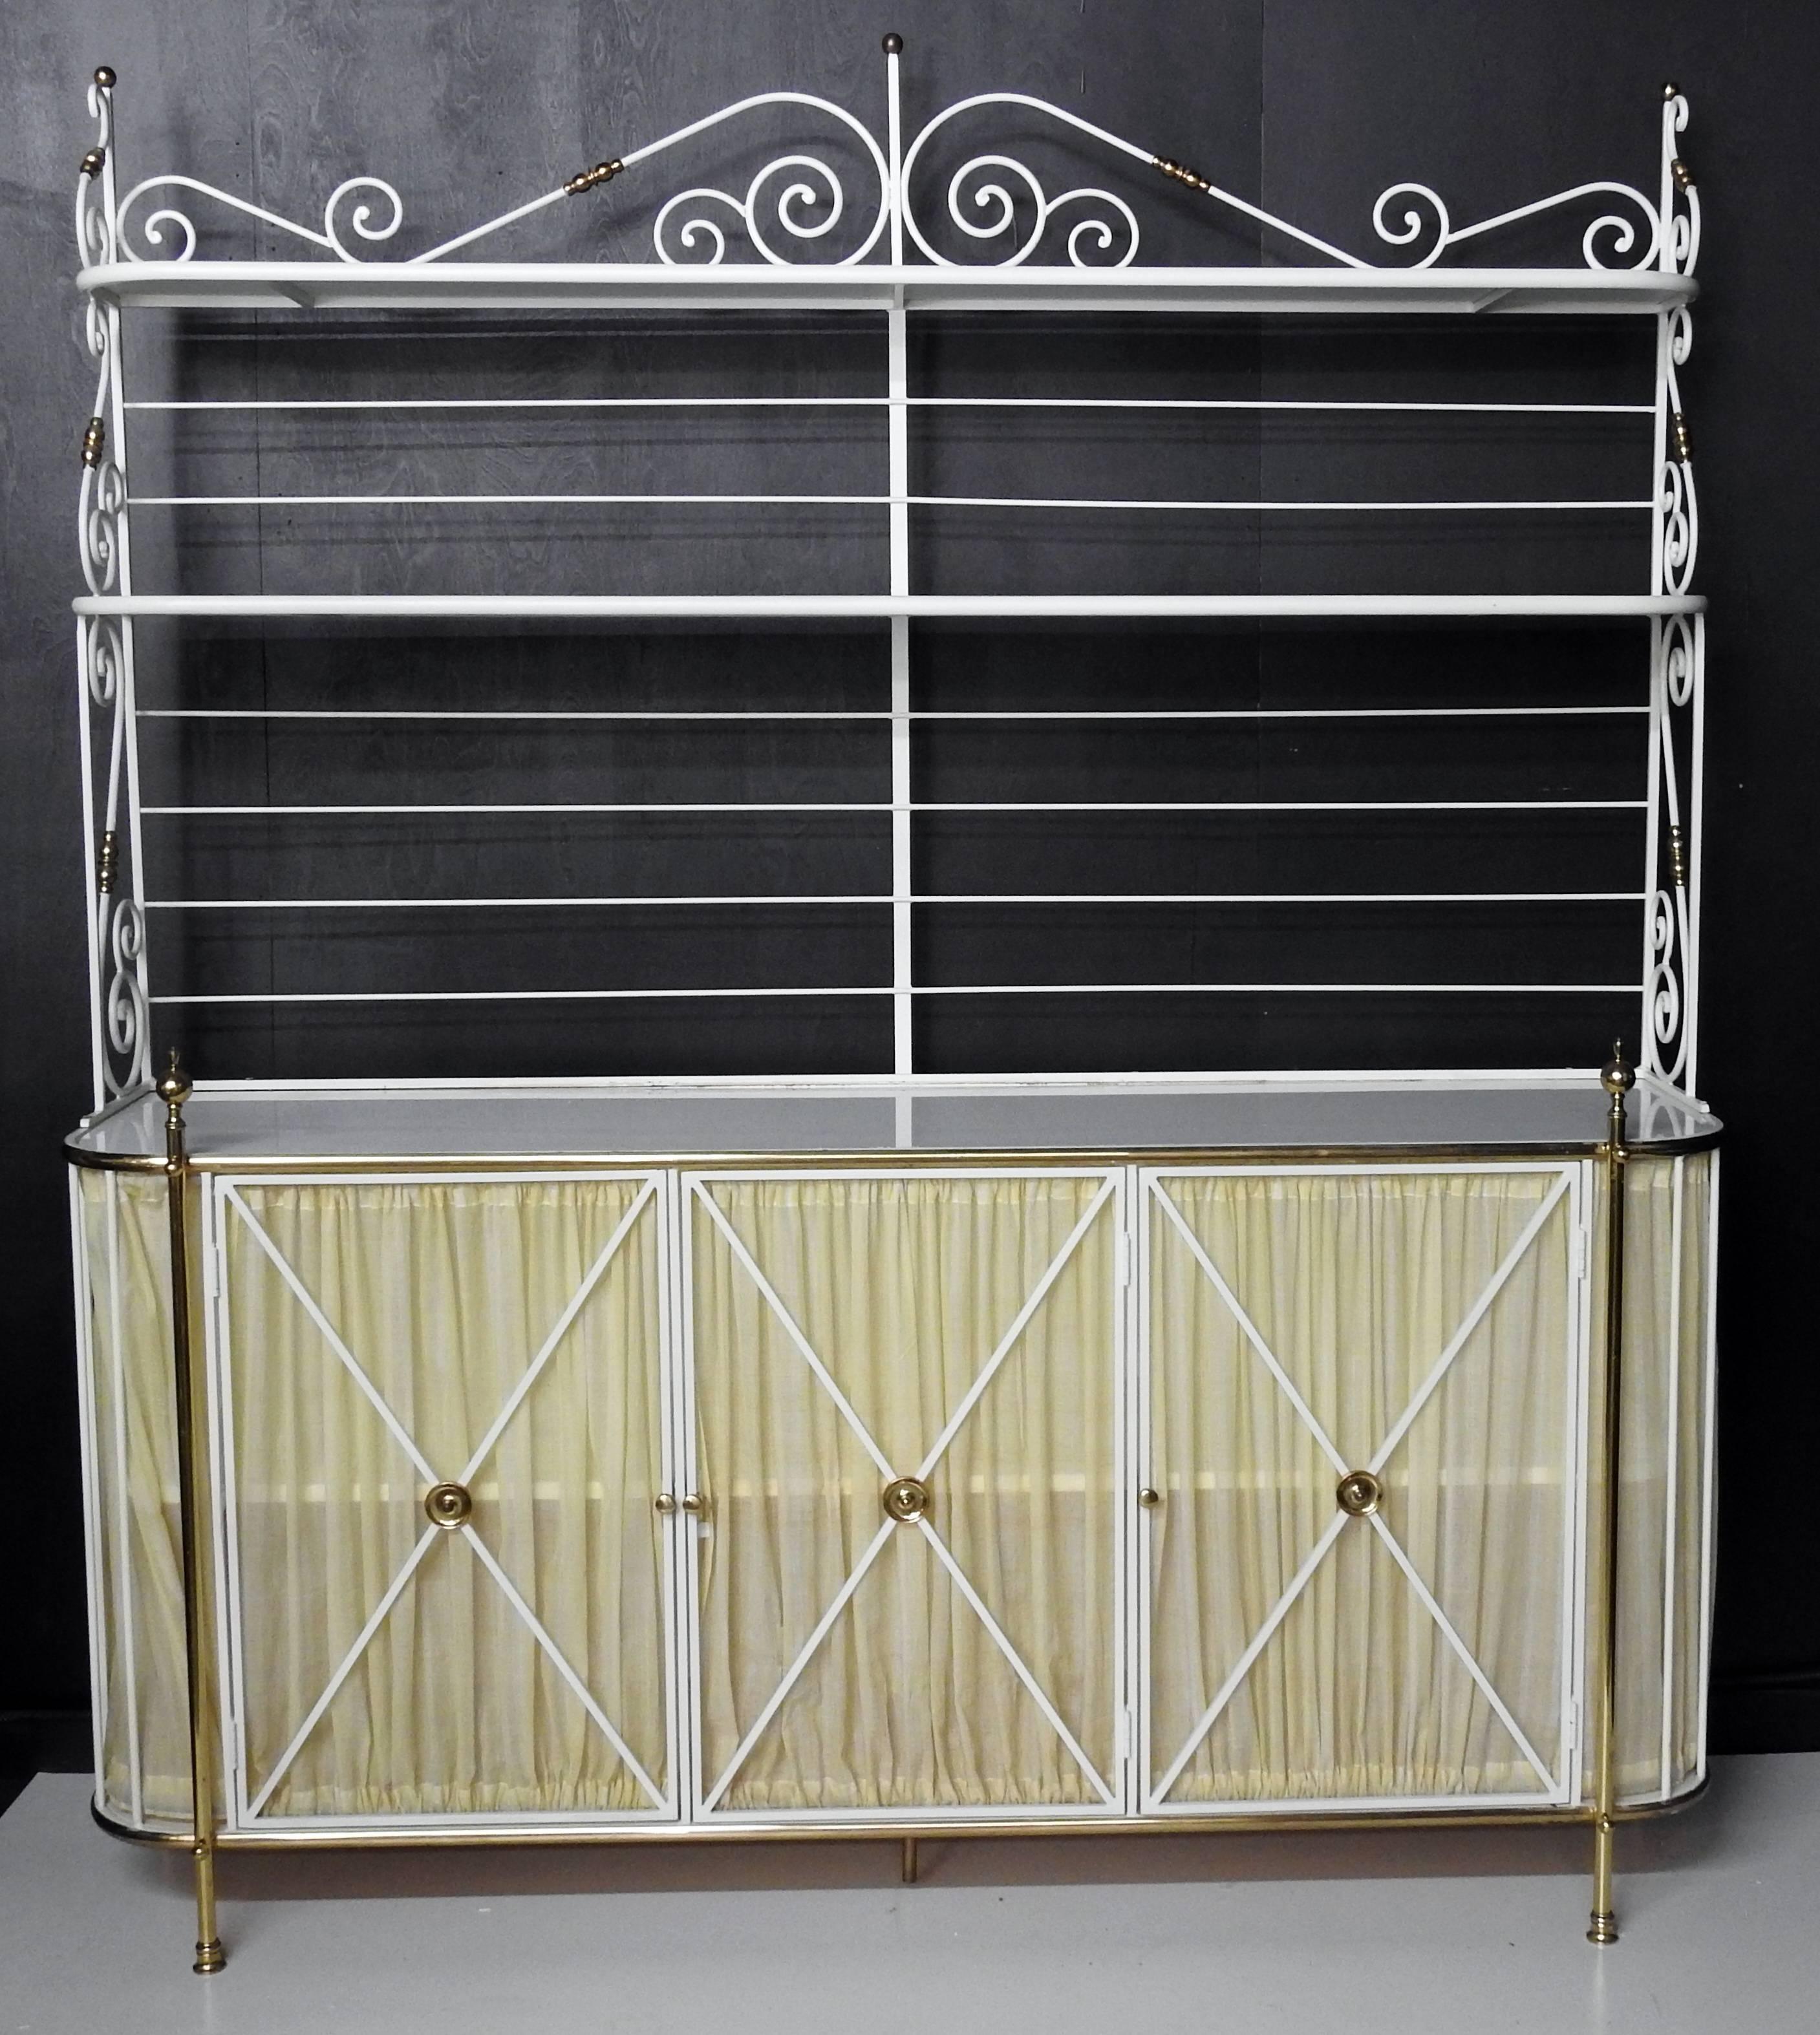 Large French bakers rack or sideboard. Iron with three milk glass shelves, brass accents, and curtained doors.